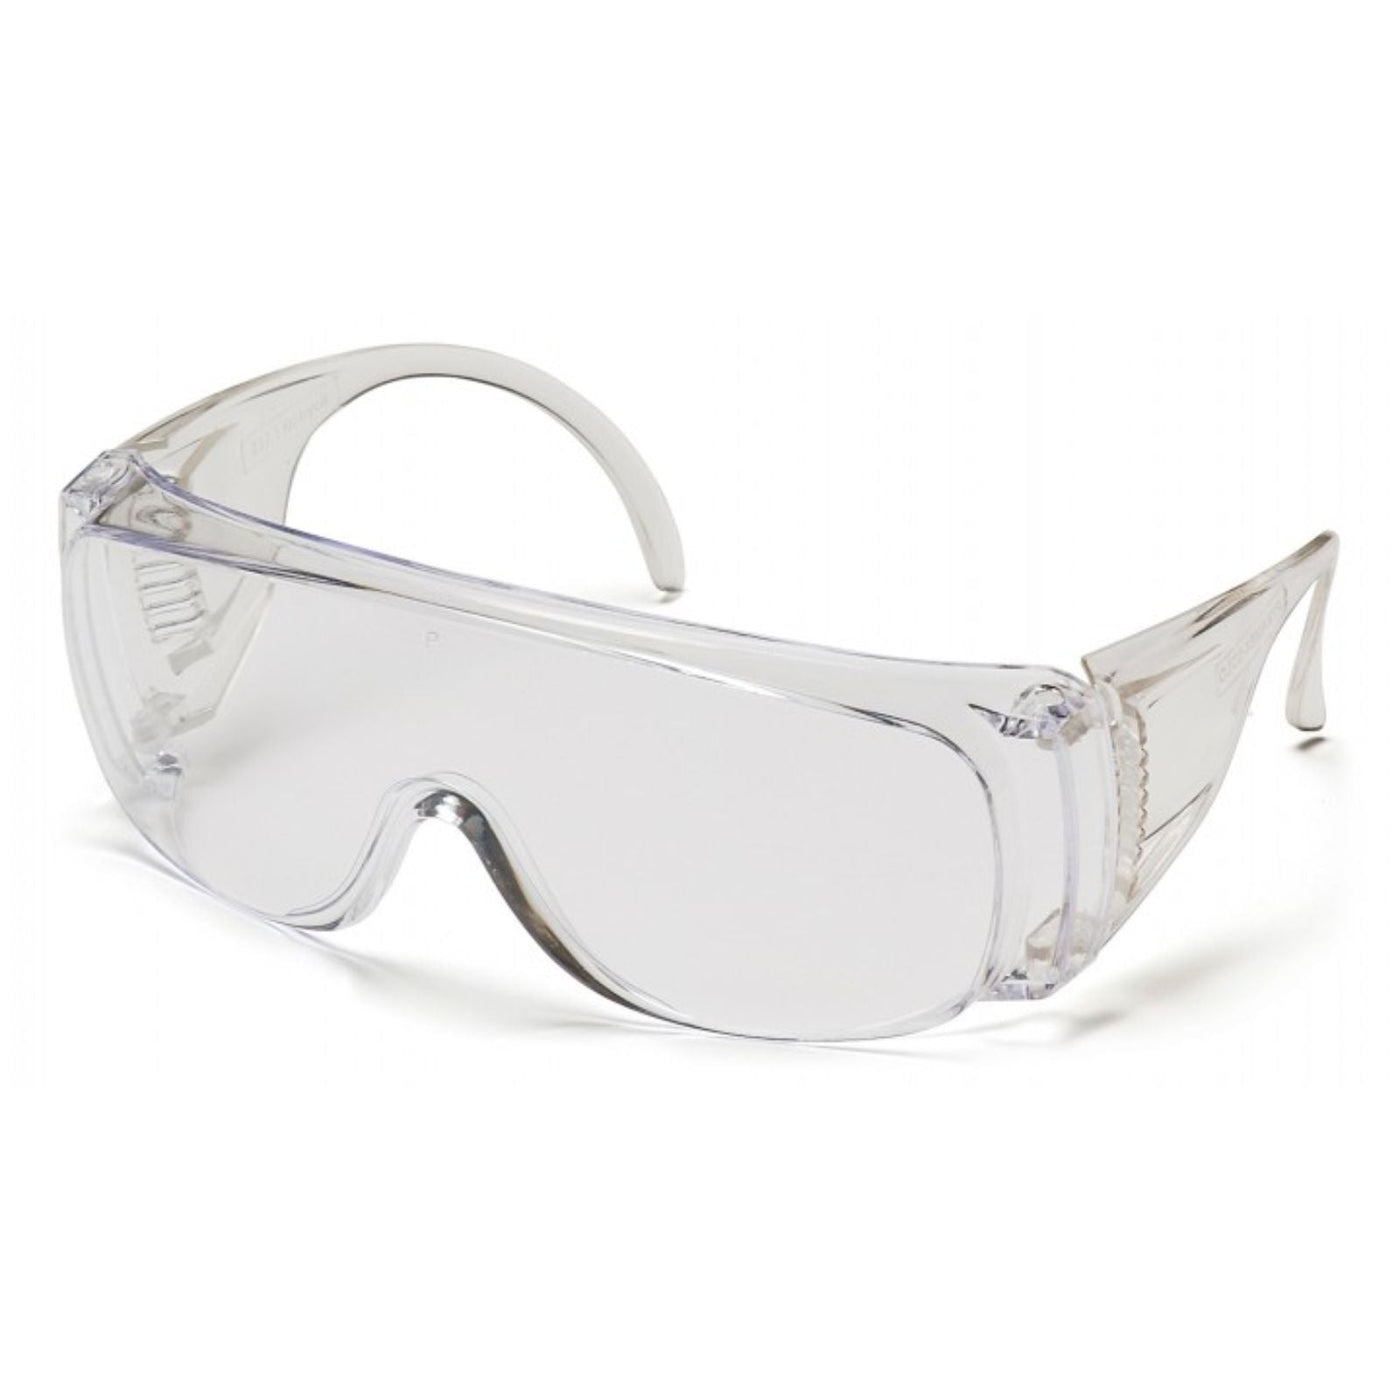 PYRAMEX SAFETY PRODUCTS Pyramex Solo Safety Glasses Clear Frame Clear Lens Apparel